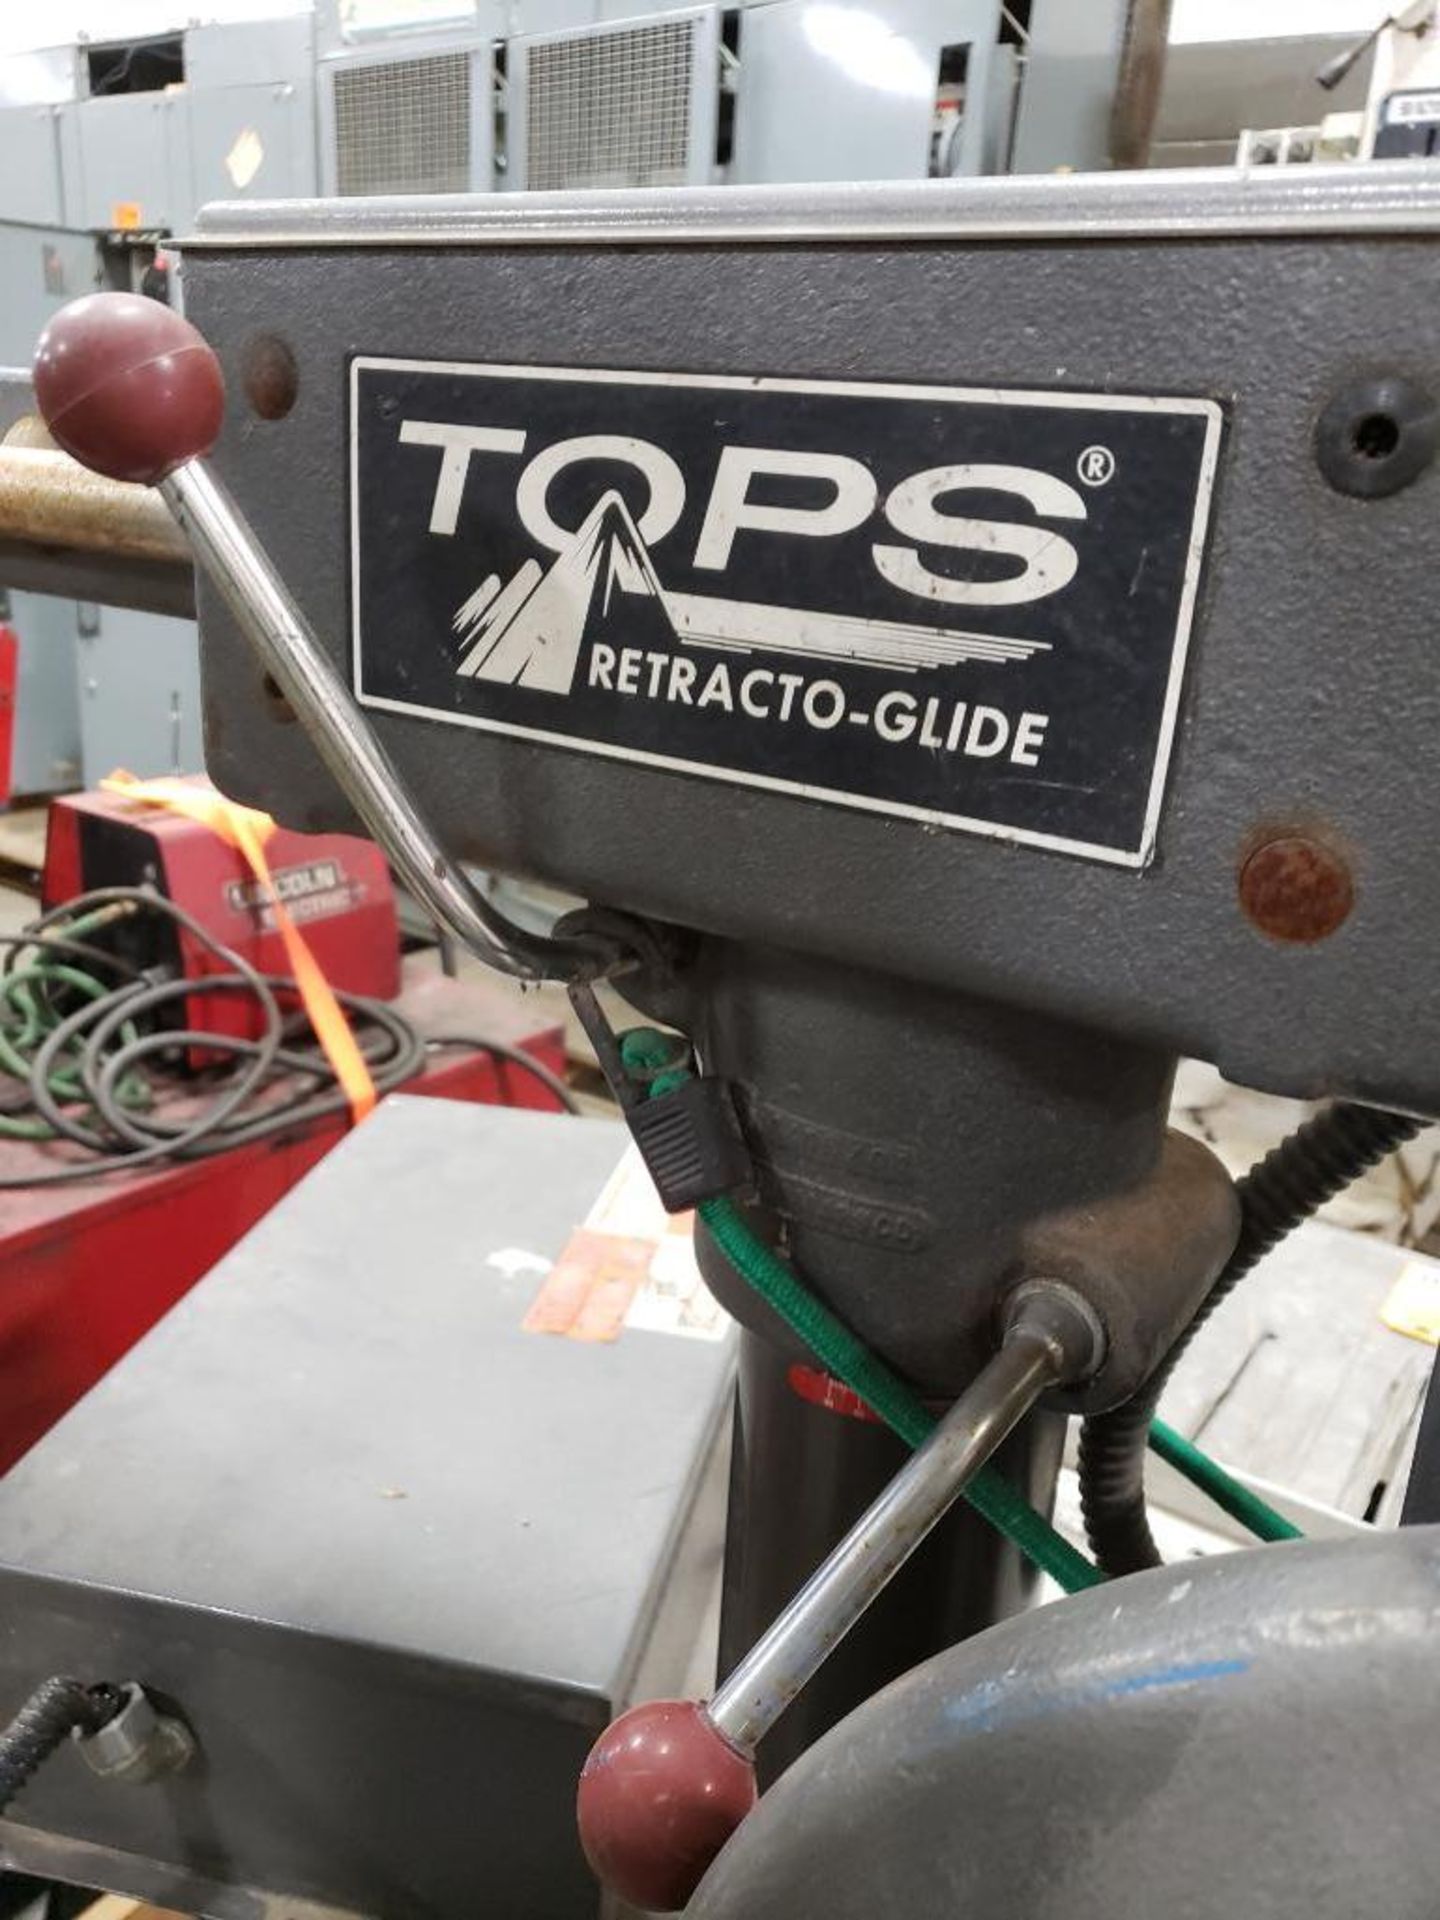 Tops retracto-saw radial arm saw. 3 phase, 460v. - Image 4 of 5